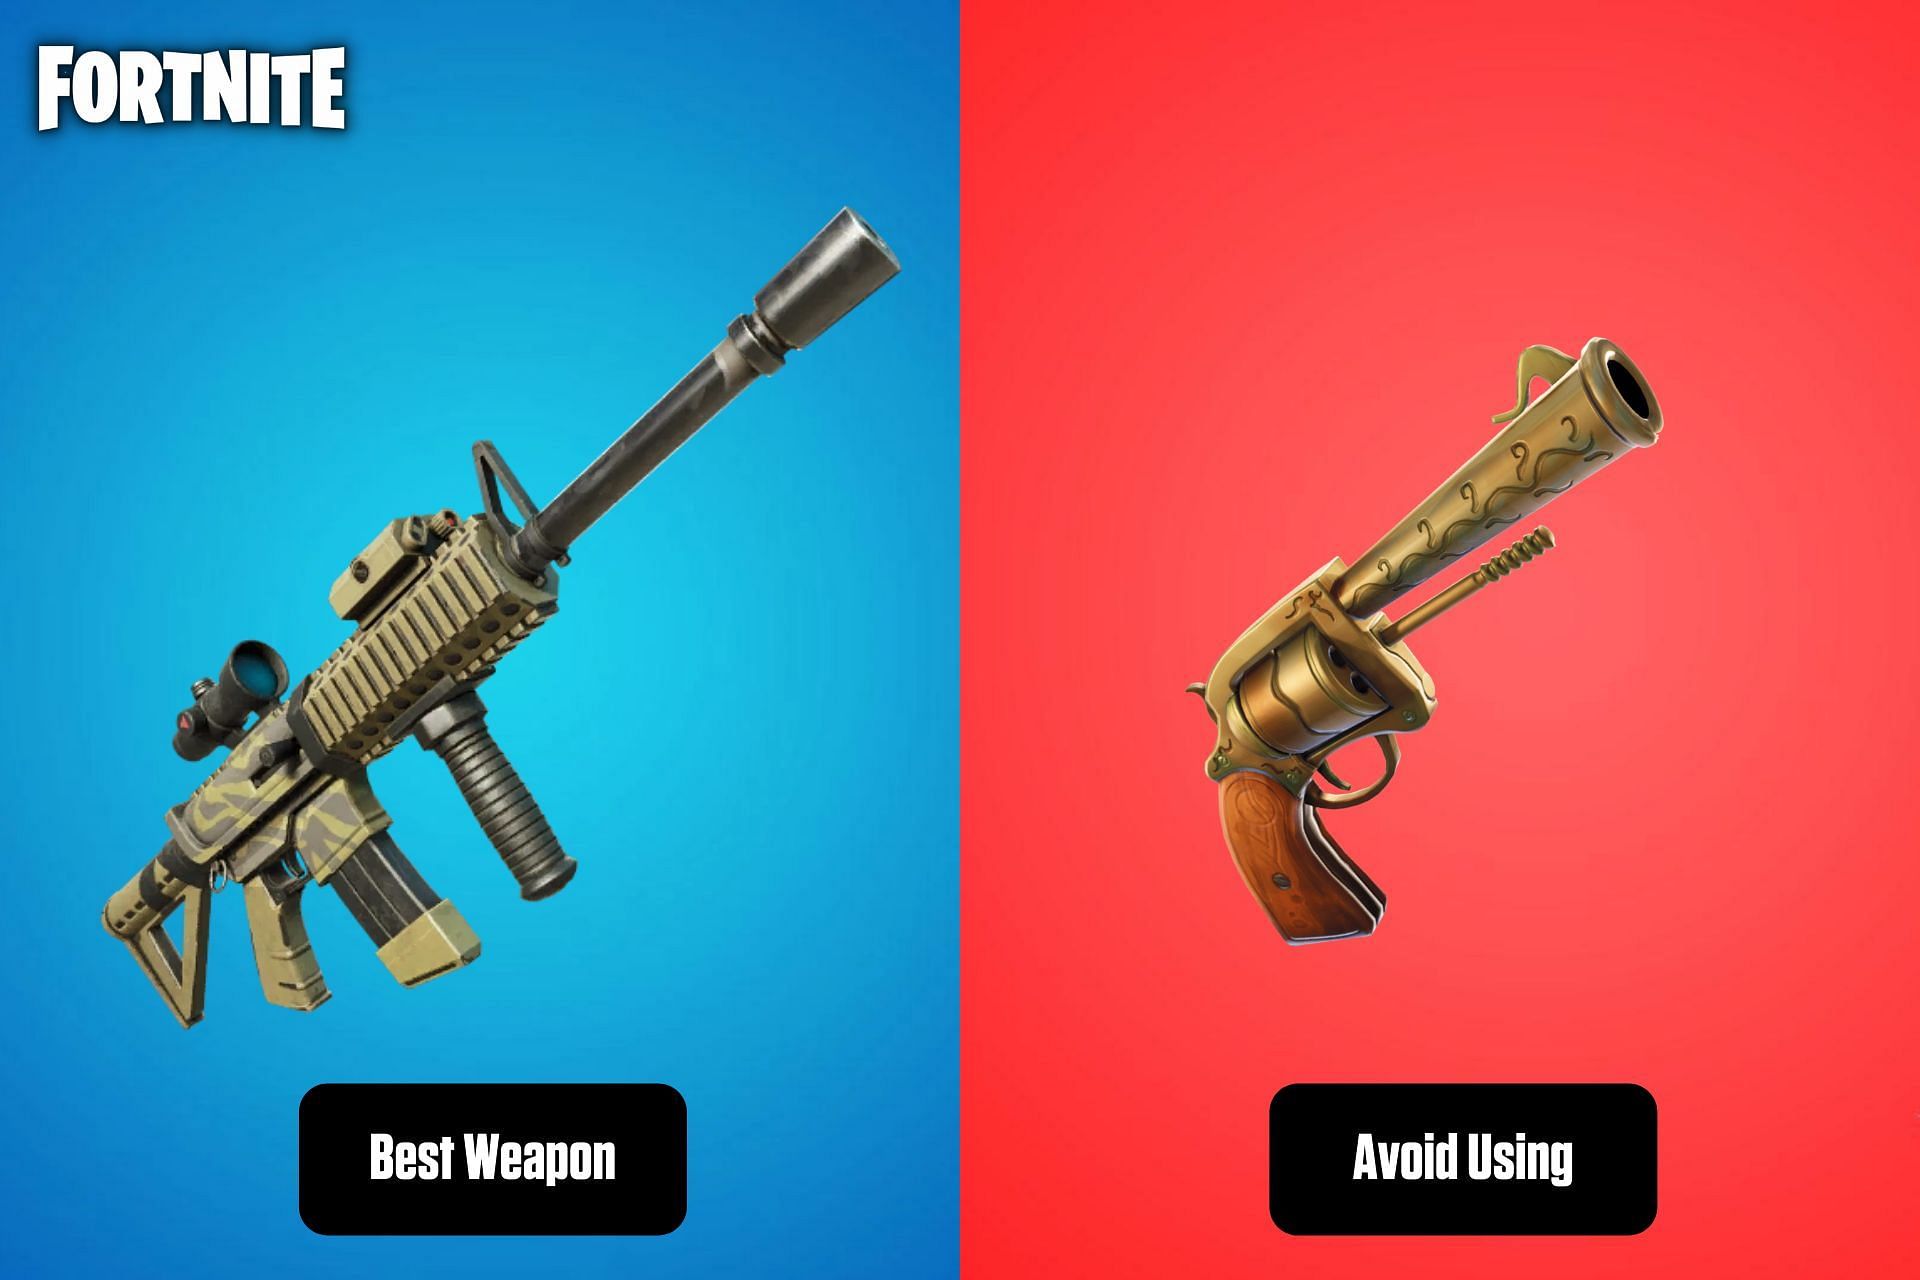 3 best weapons for Fortnite Chapter 3 Season 2 and 3 weapons to avoid (Image via Sportskeeda)